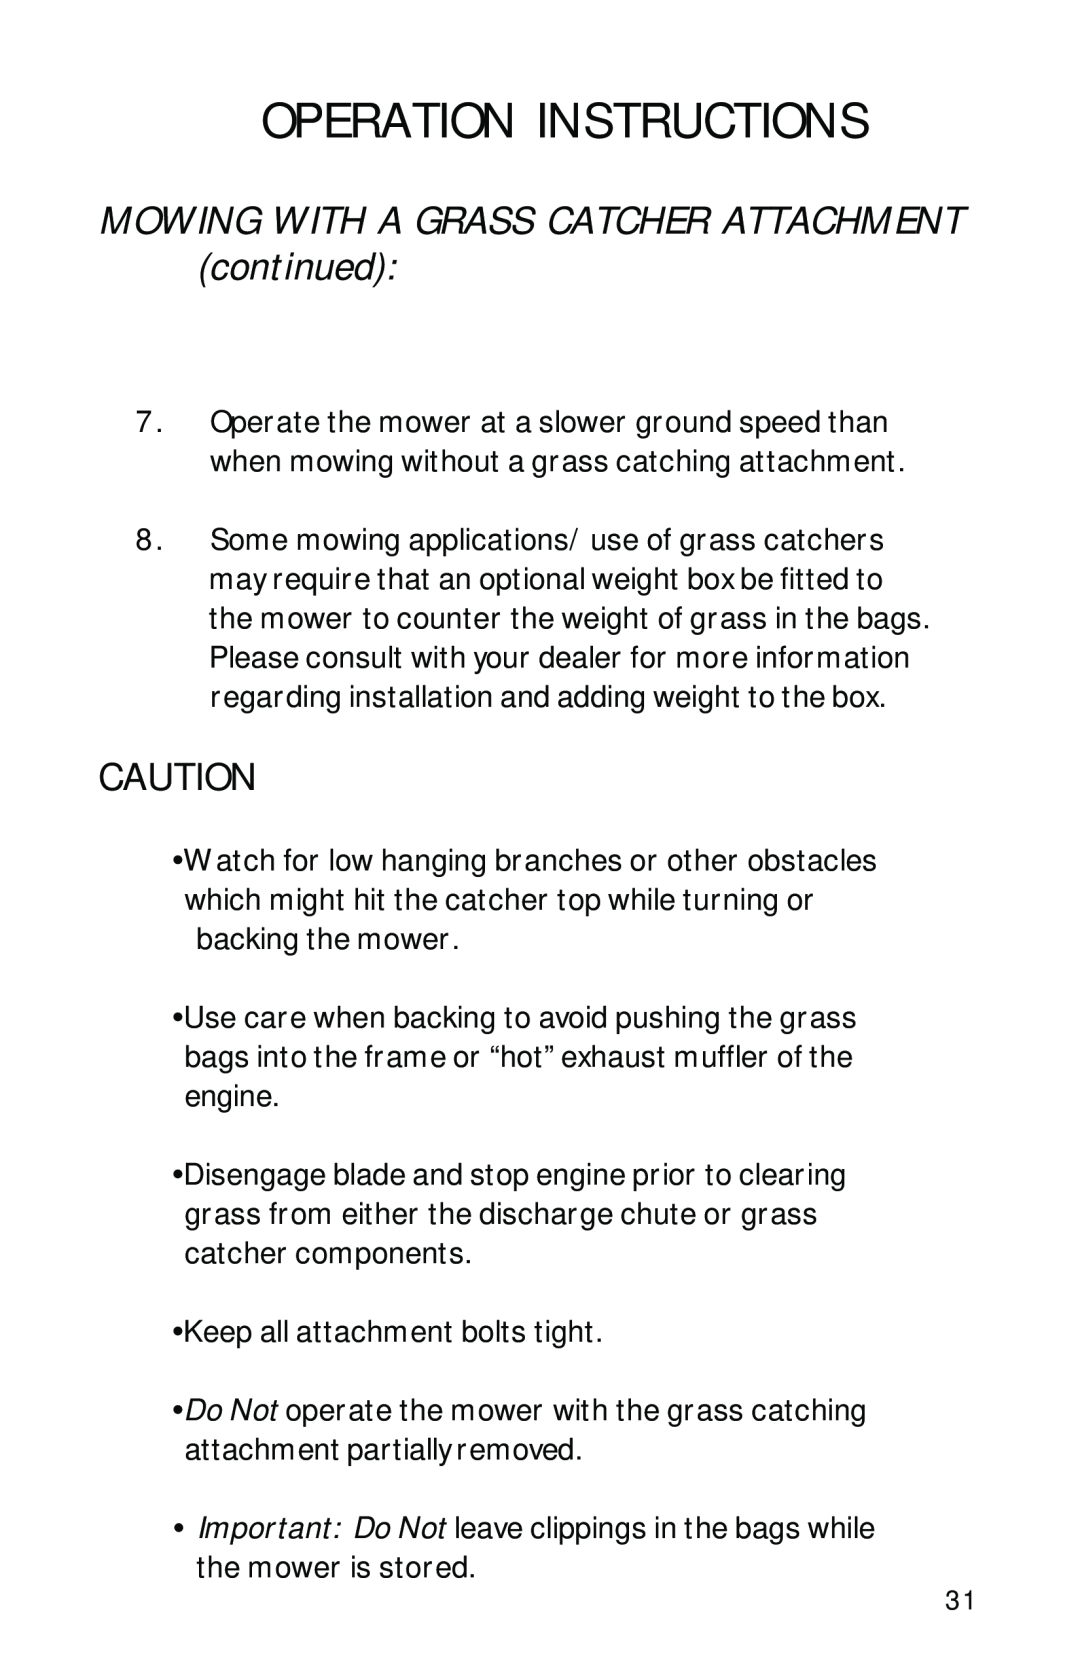 Dixon 1950-2300 Series manual MOWING WITH A GRASS CATCHER ATTACHMENT continued, Operation Instructions 